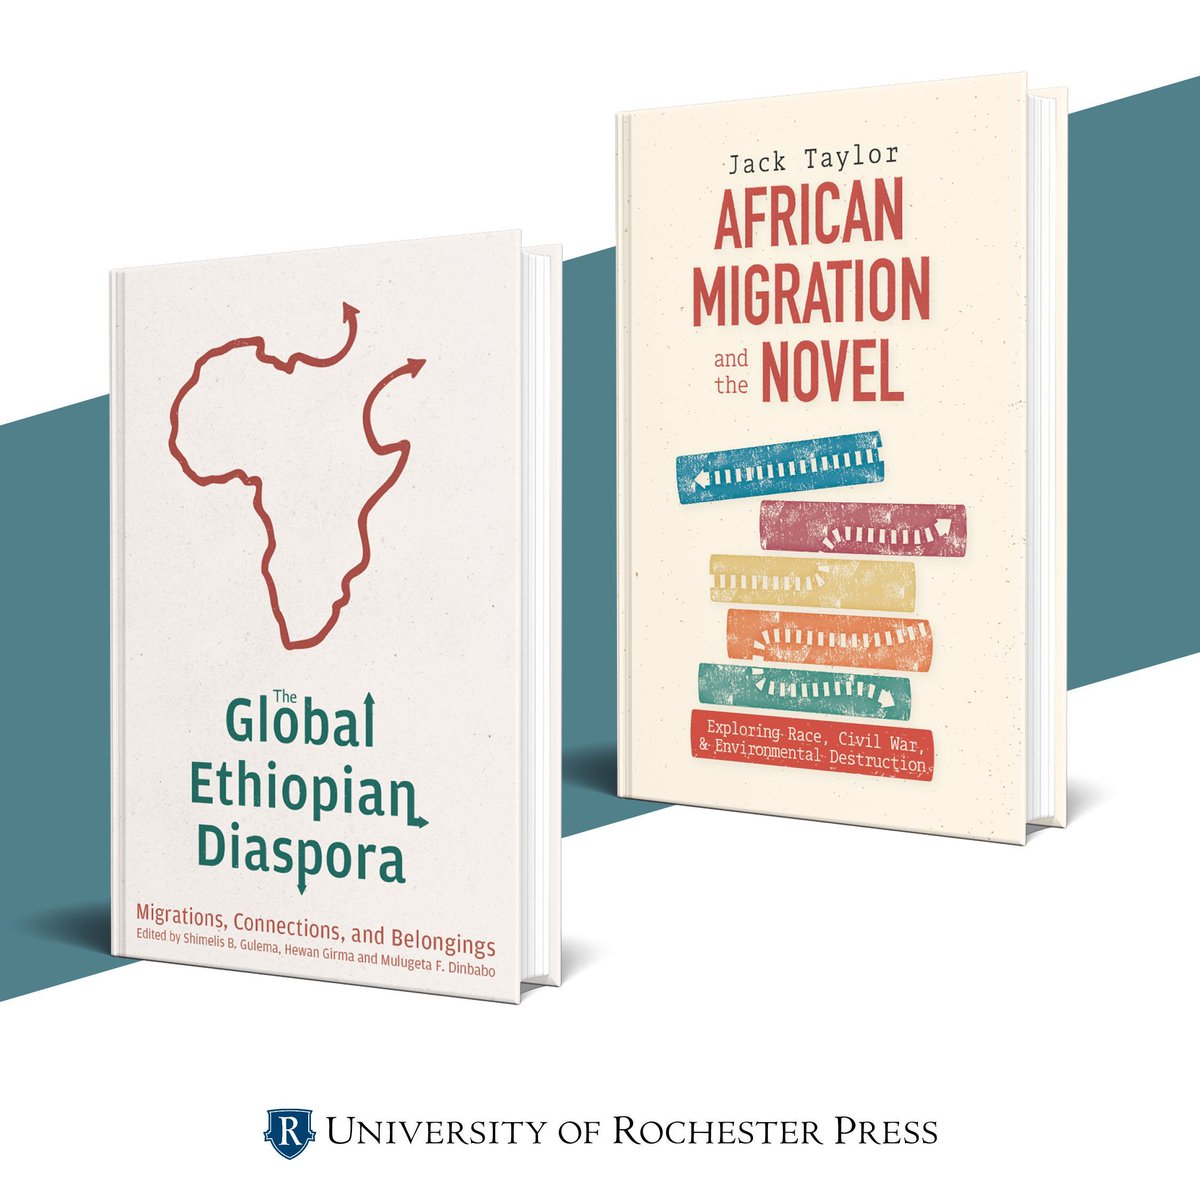 Upcoming releases from @UofR Press! The Global Ethiopian Diaspora and African Migrations and the Novel are available for pre-order and publish next month. #AfricanStudies buff.ly/3TIldAD